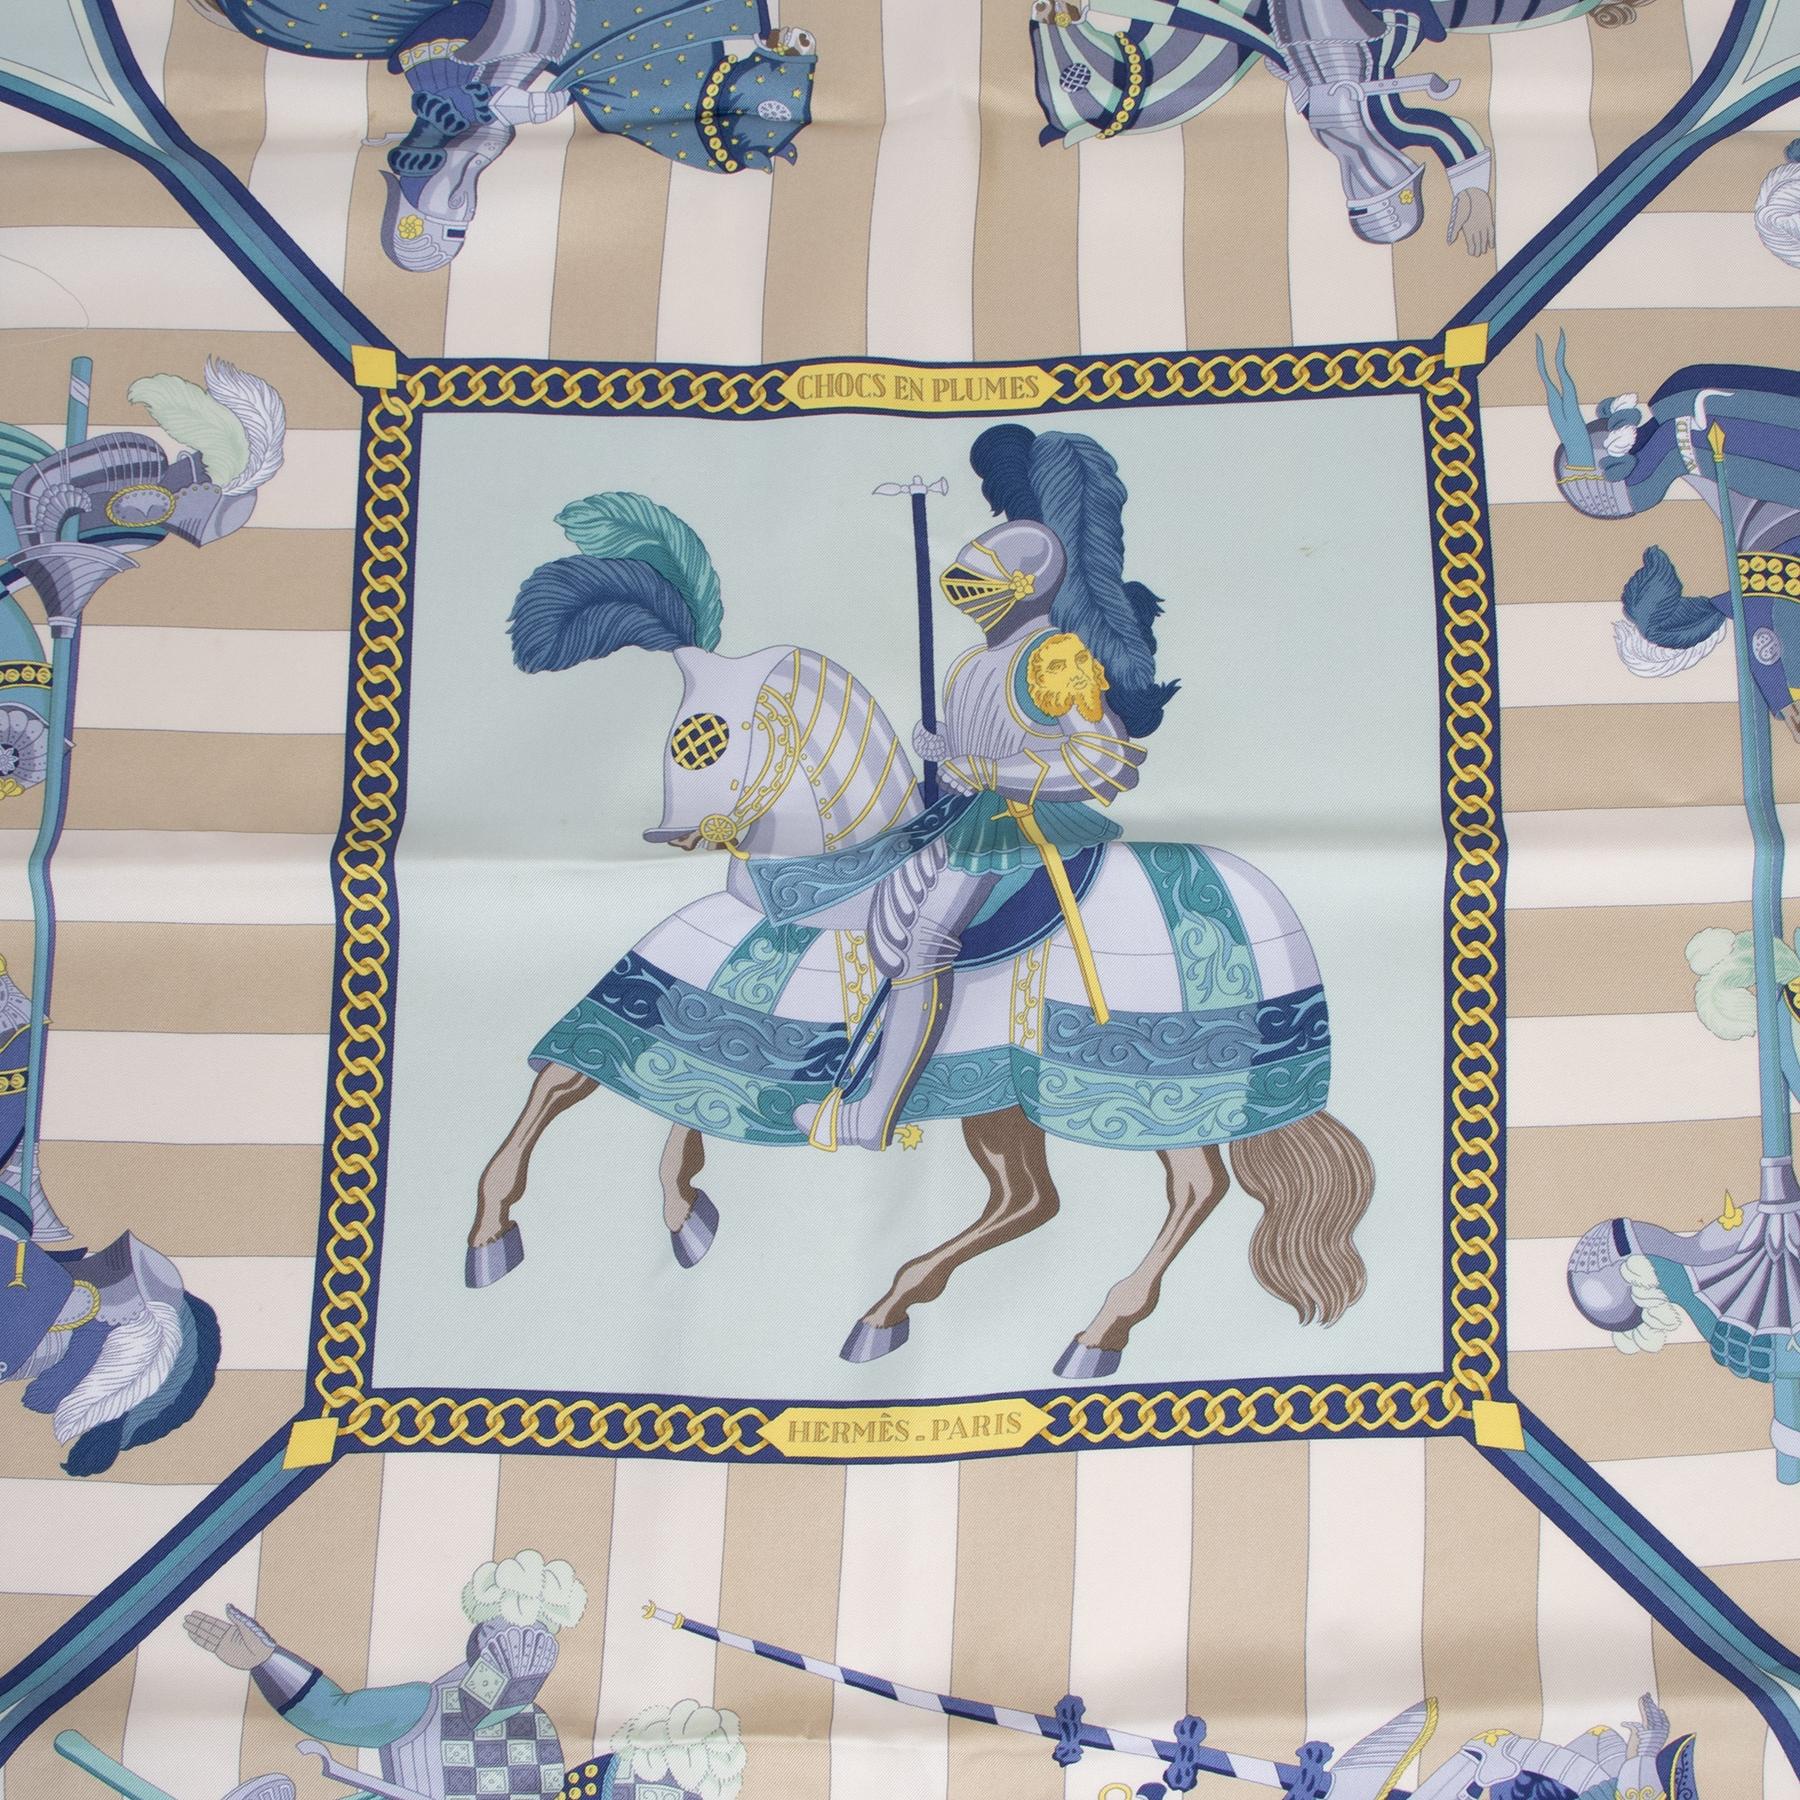 Good preloved condition

Hermes Chocs En Plumes Carré Silk Scarf

This stunning silk Hermes scarf features the Chocs en Plumes pattern. The scarf is crafted in beautiful blue and beige colors and is perfect to add and elegant touch to your outfit.